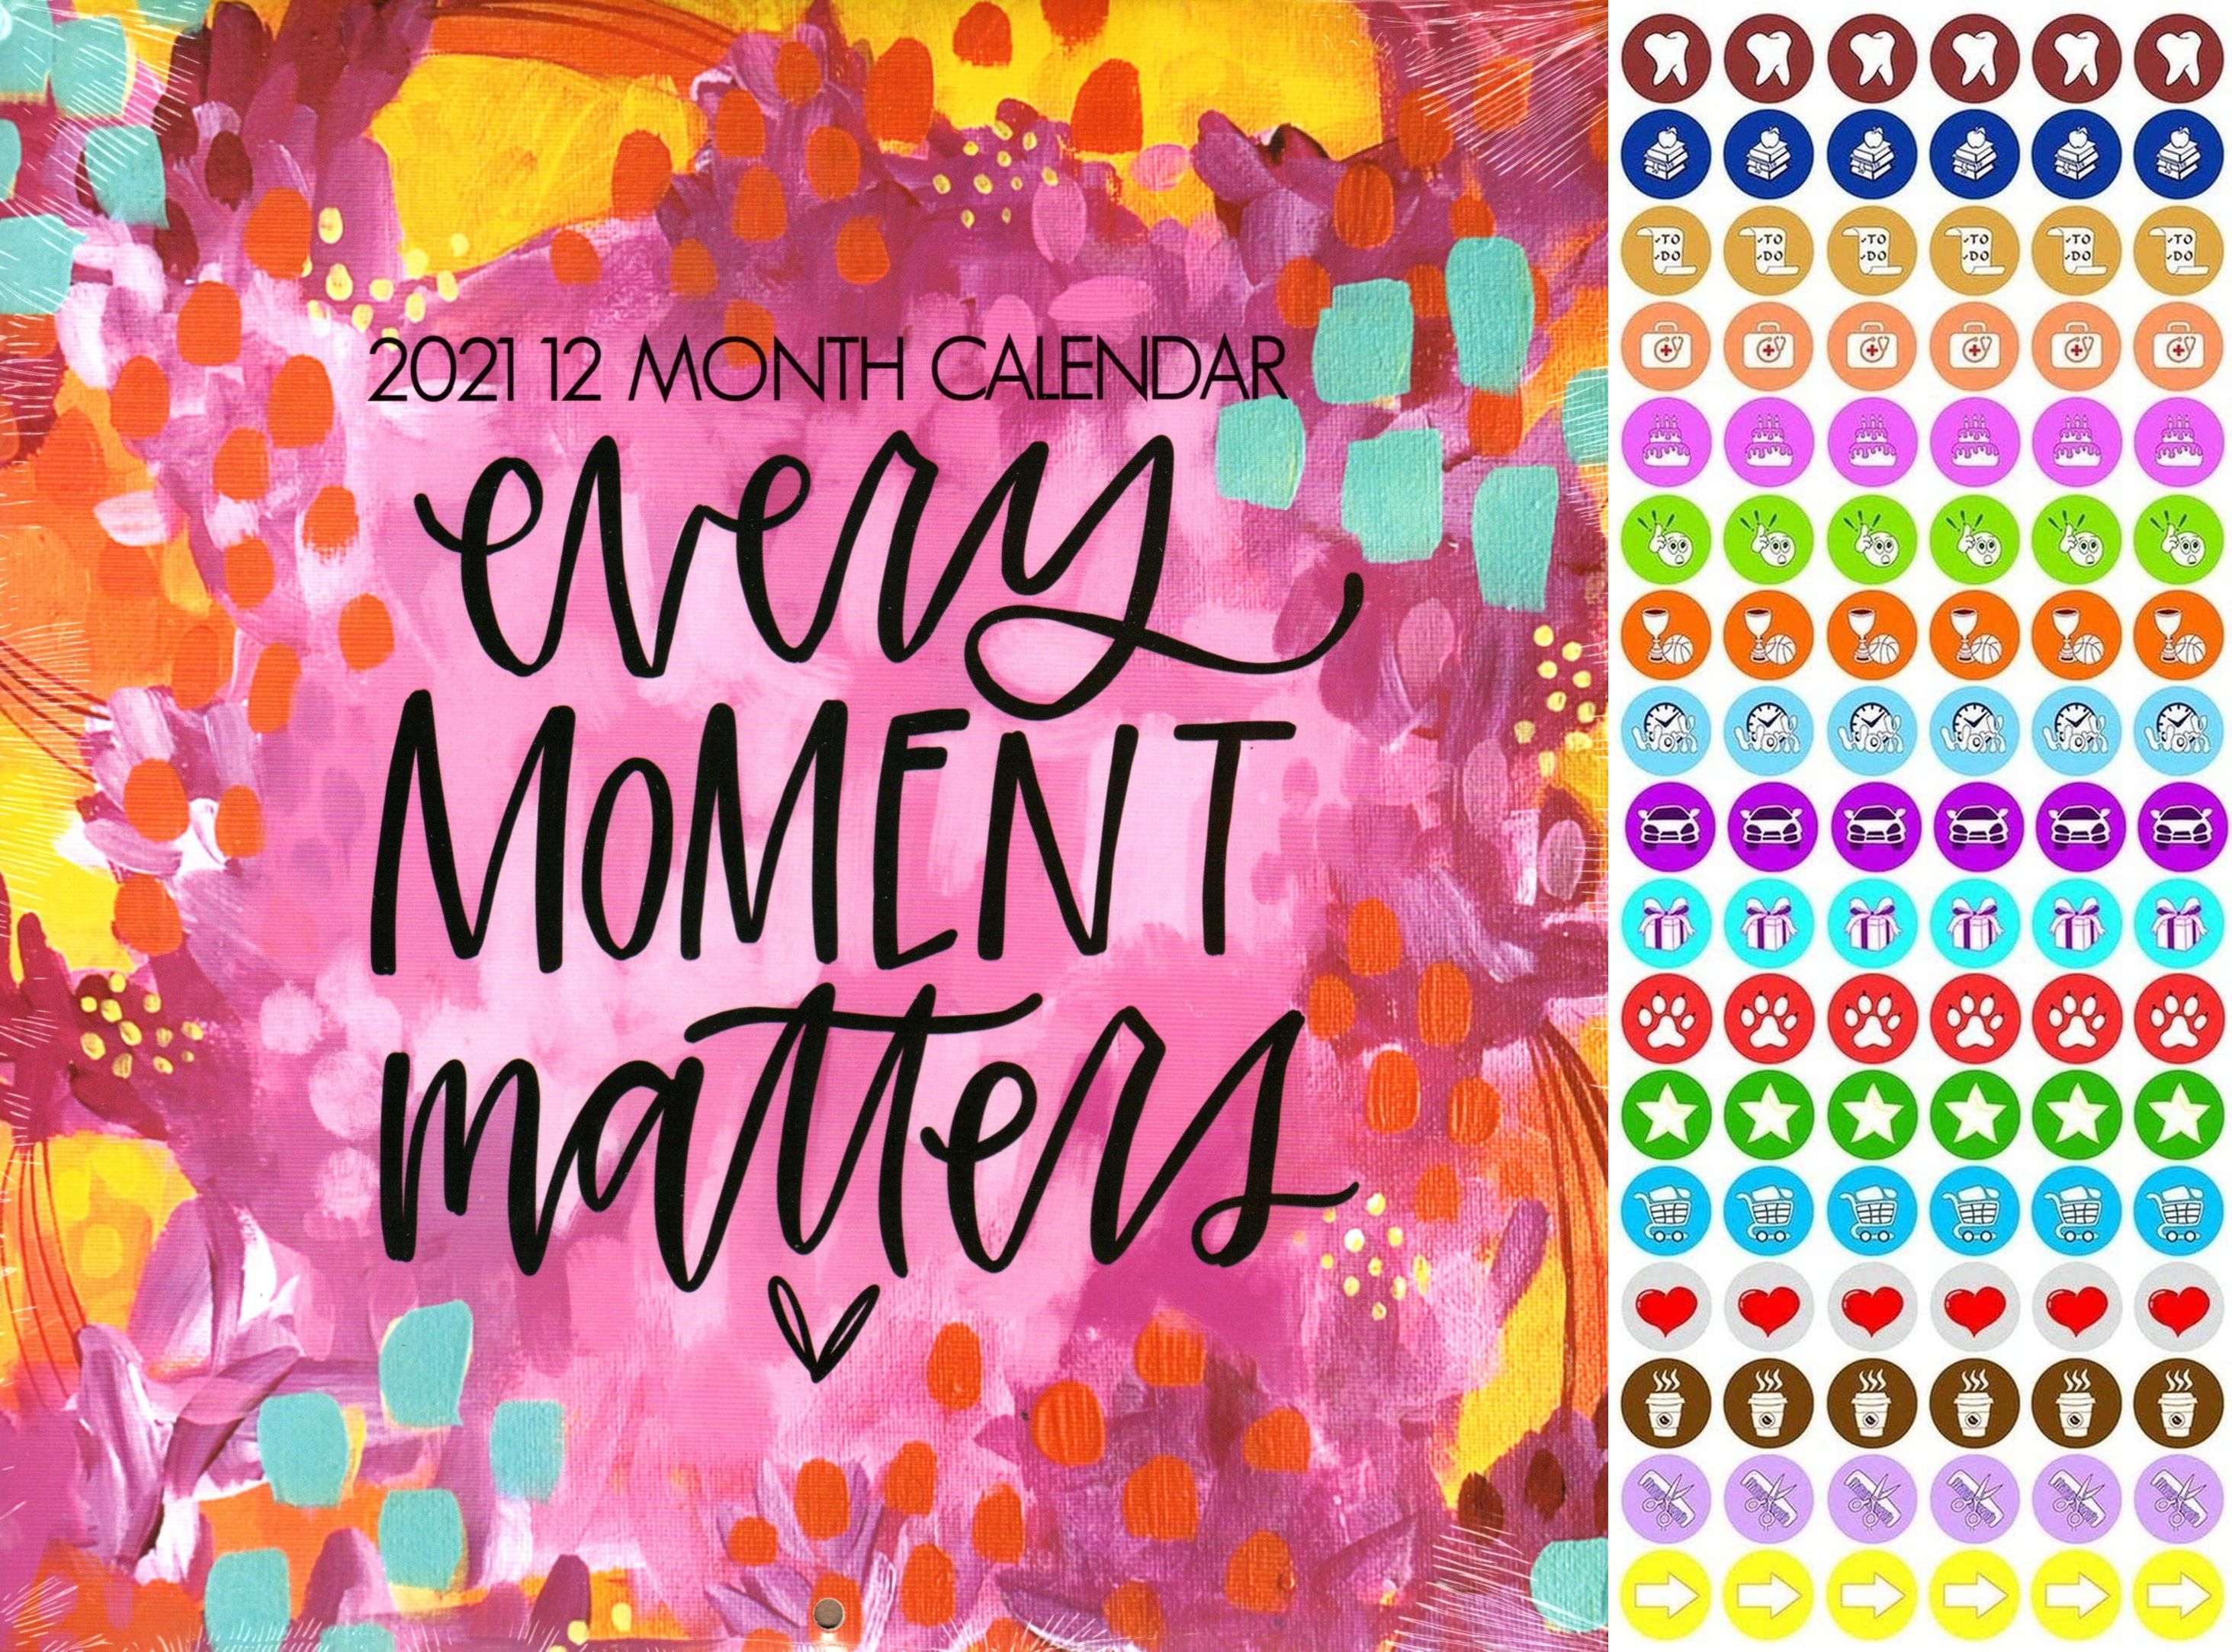 greenbier international 2021 12 Month Wall Calendar - Every Moment Matters - with 100 Reminder Stickers